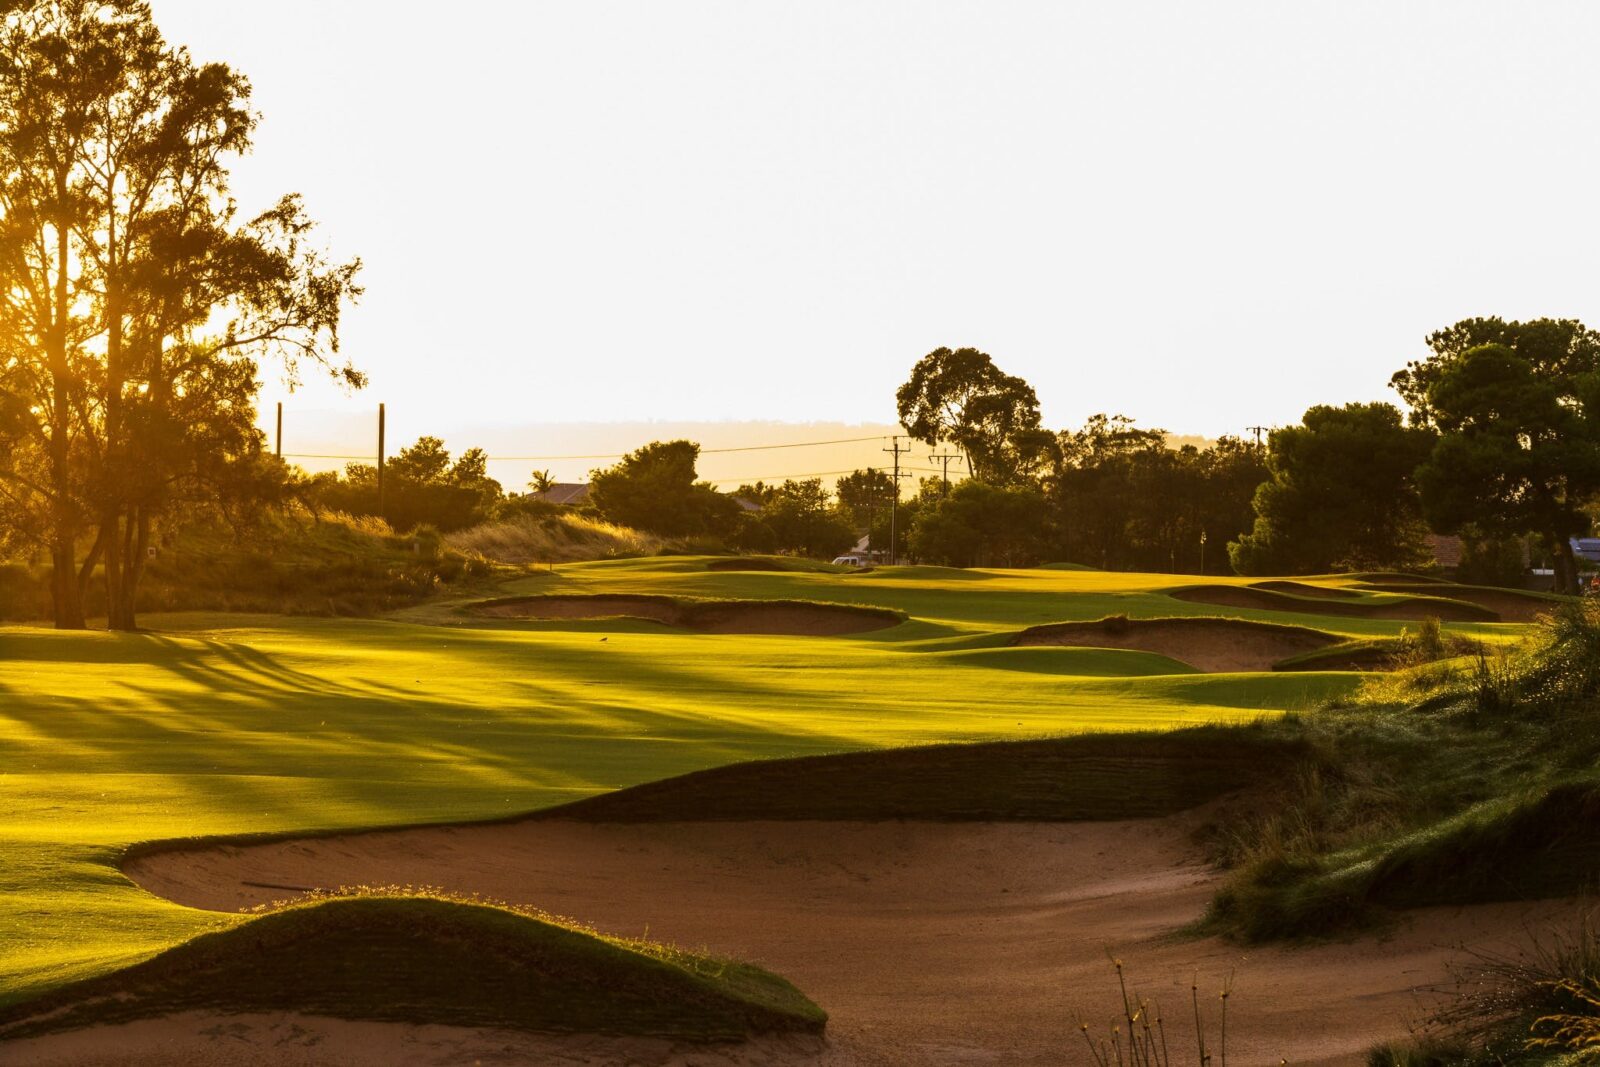 Course Imagery from the Glenelg Golf Club